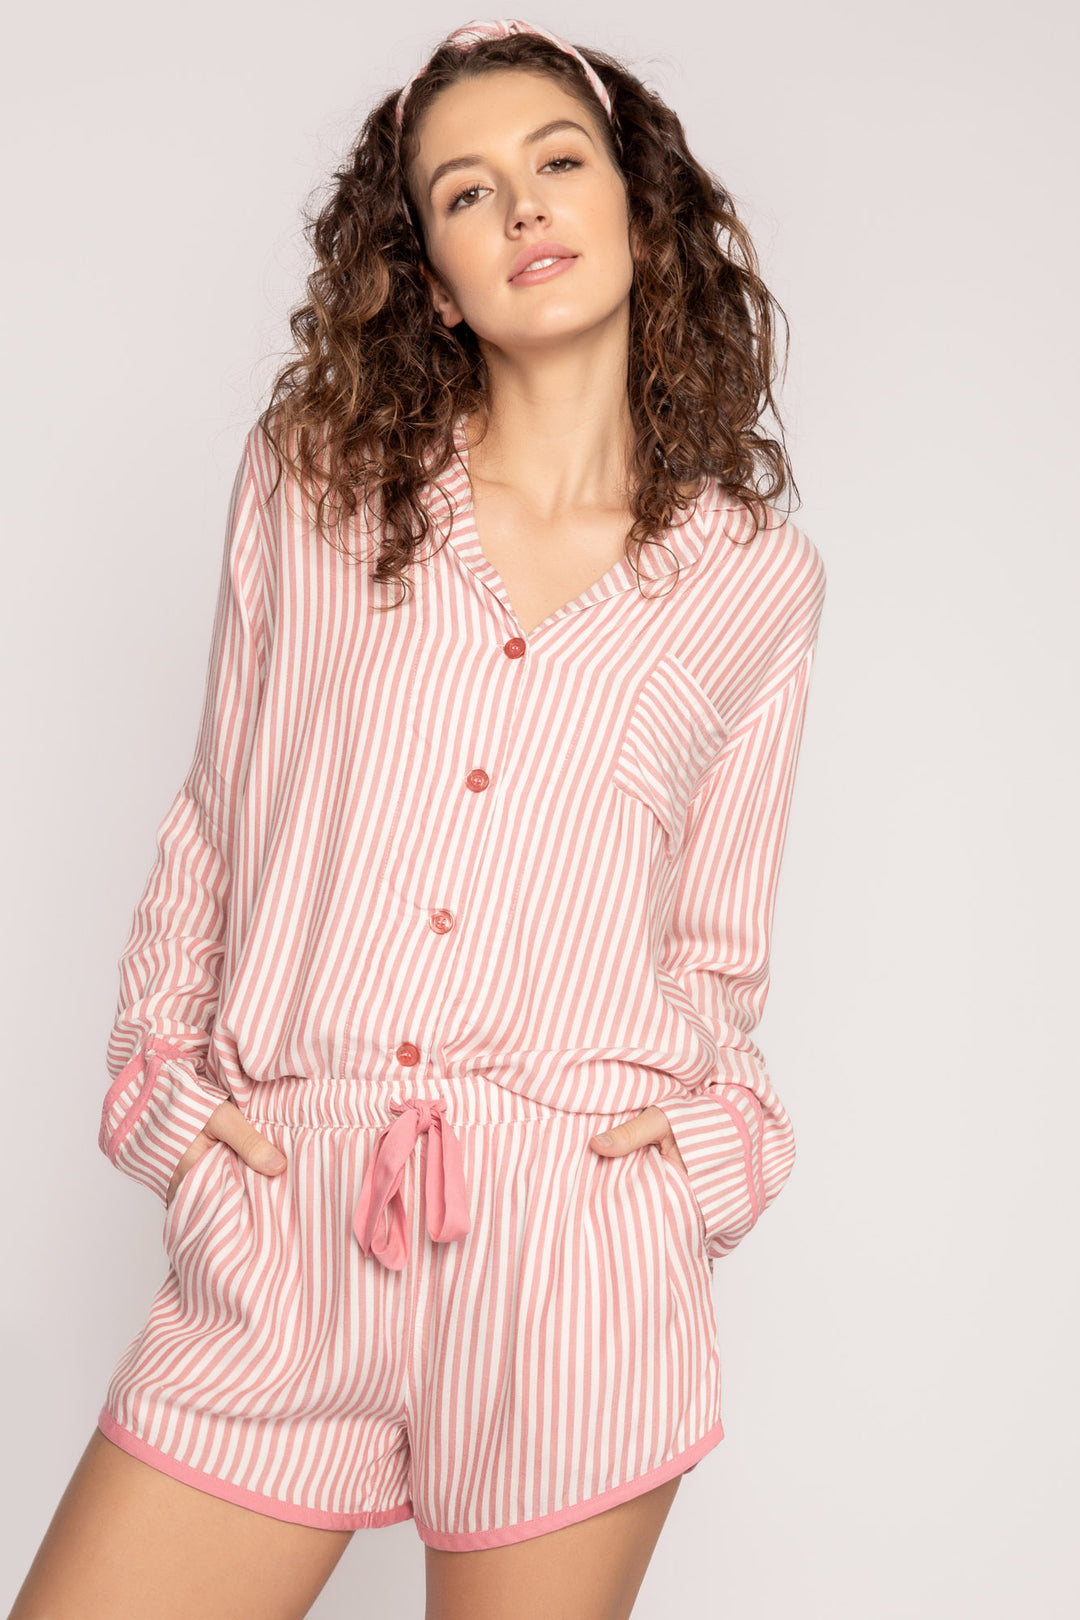 Ivory-red striped woven pajama short set. Long sleeve button top, short has tie waist. Hair wrap incl. (7257680576612)